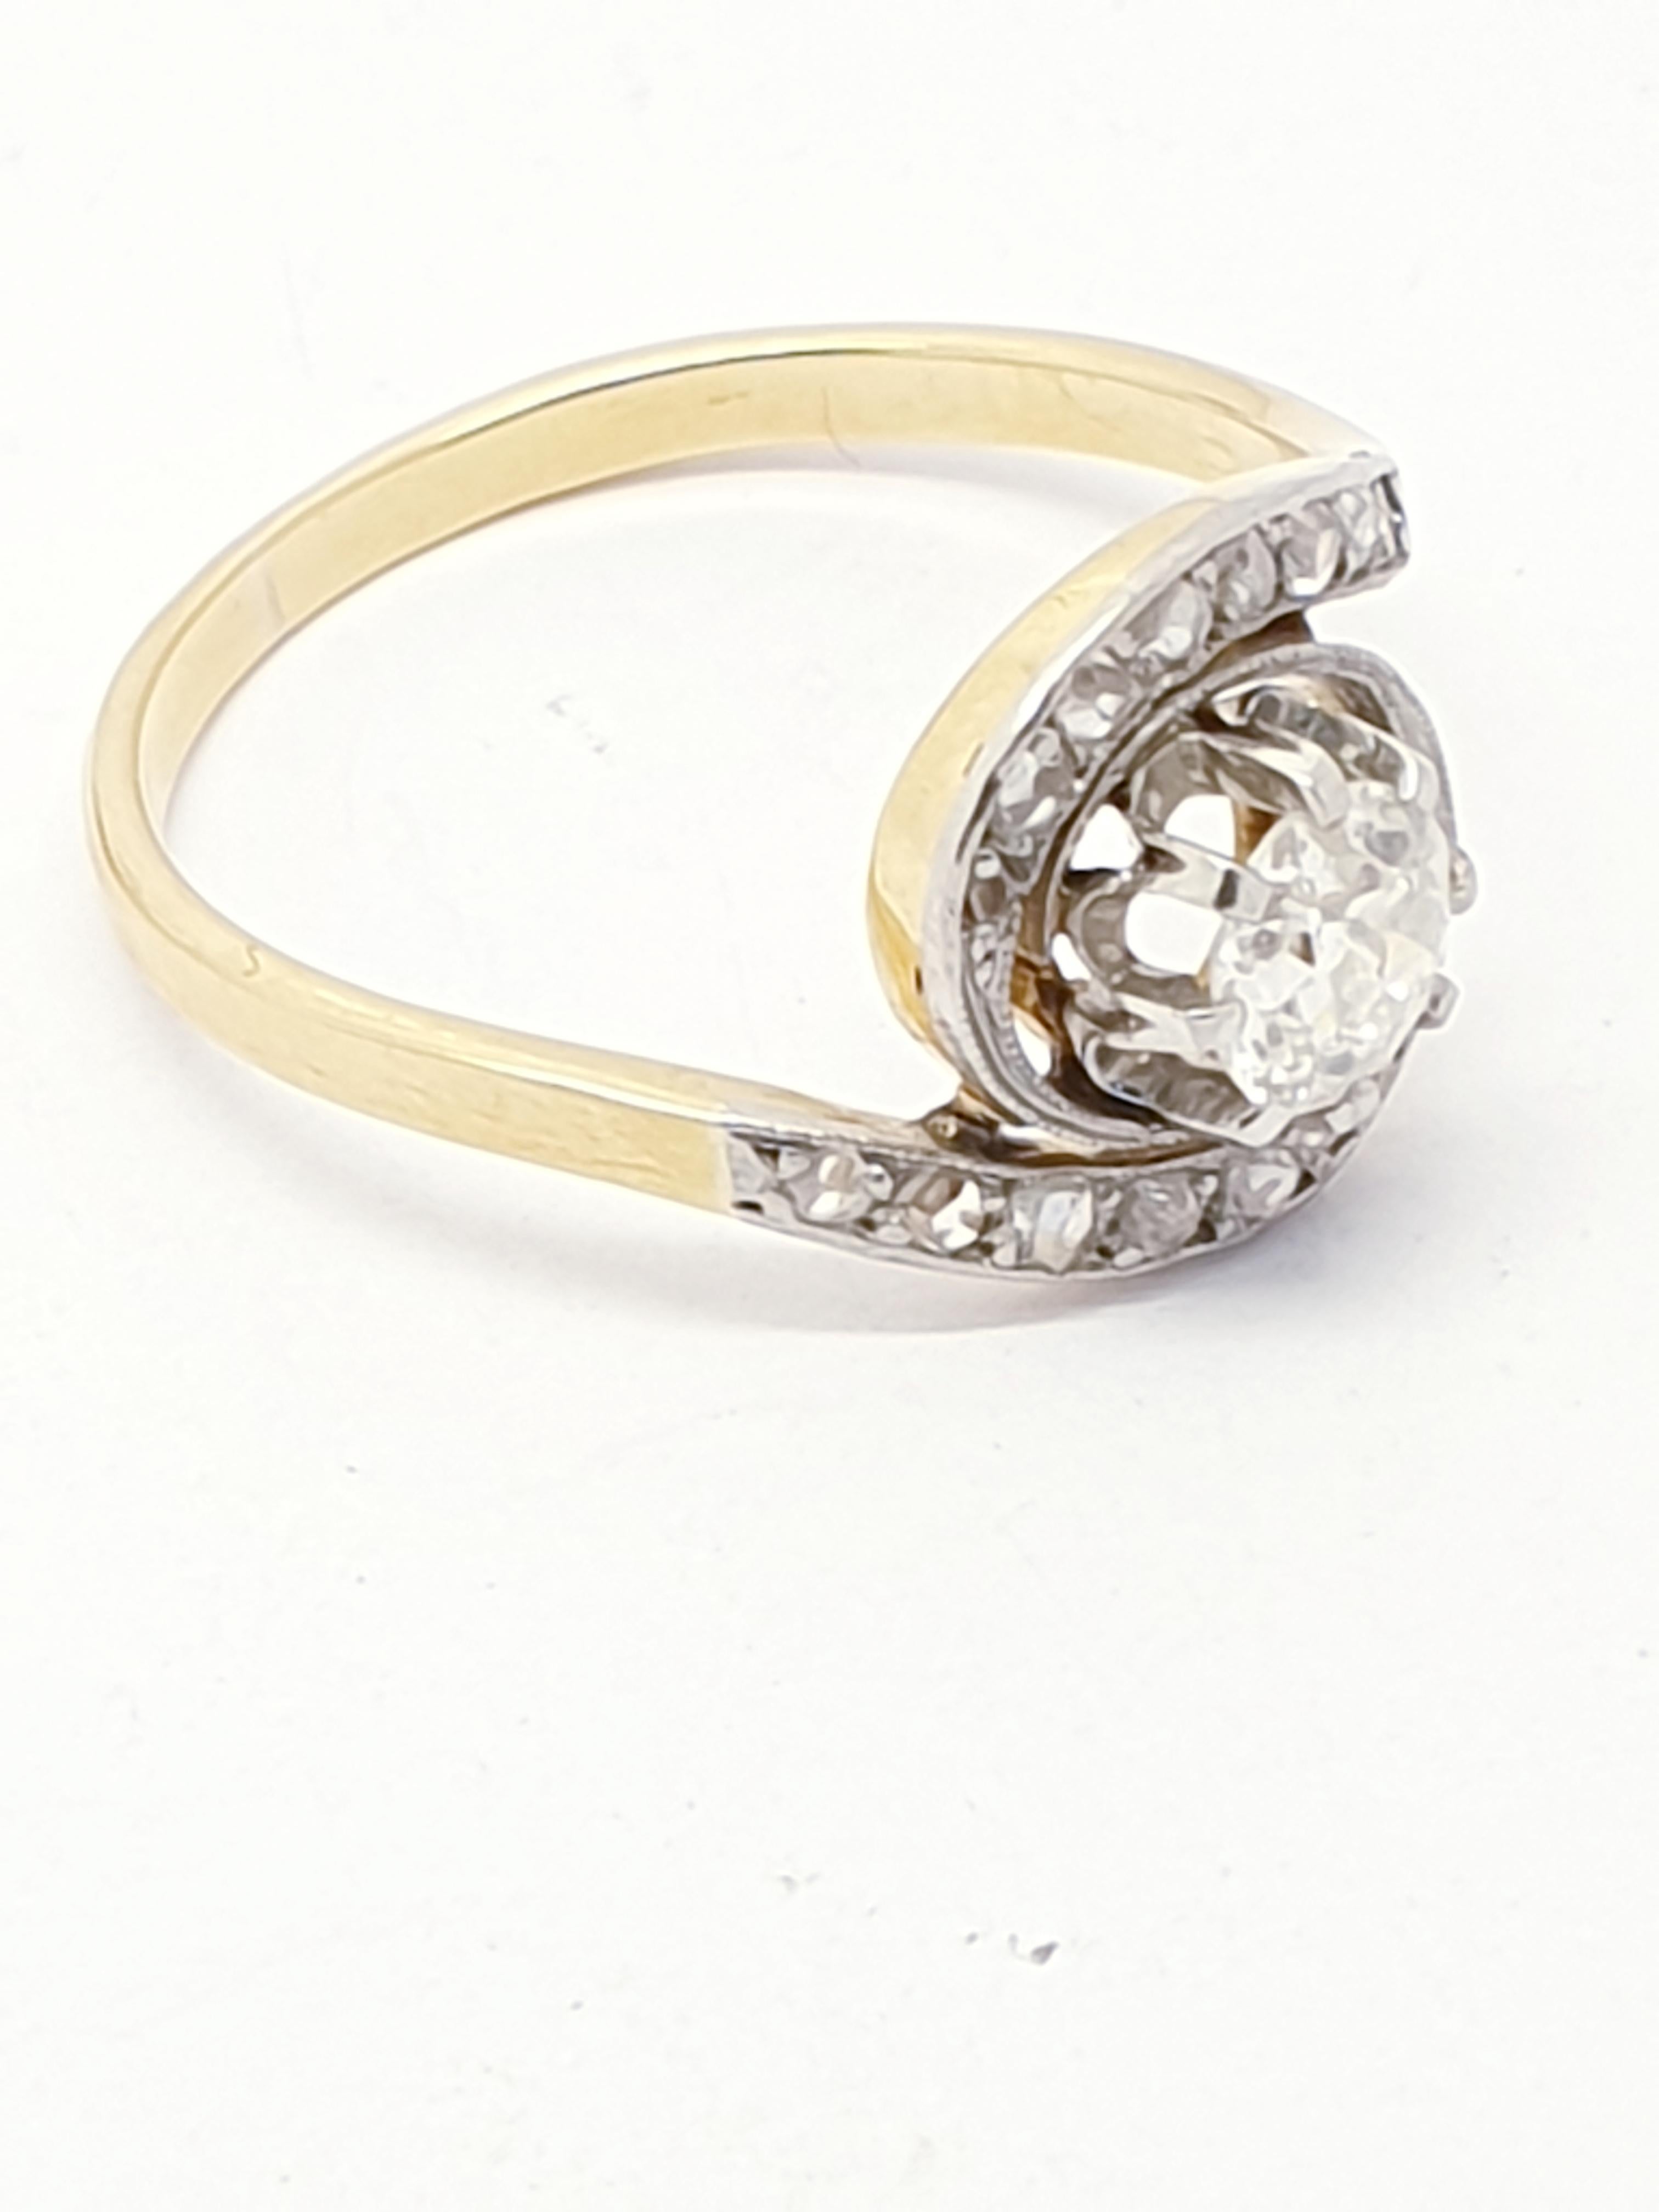 Antique late 19th Century tourbillon or swirl diamond ring. French origin. The center is set with 0.55 ct old cut diamond ,the platinum dipped swirl part set with 18 rose cut  diamonds. Eagle hallmark for 18 kt gold. Very unique beautiful old piece.